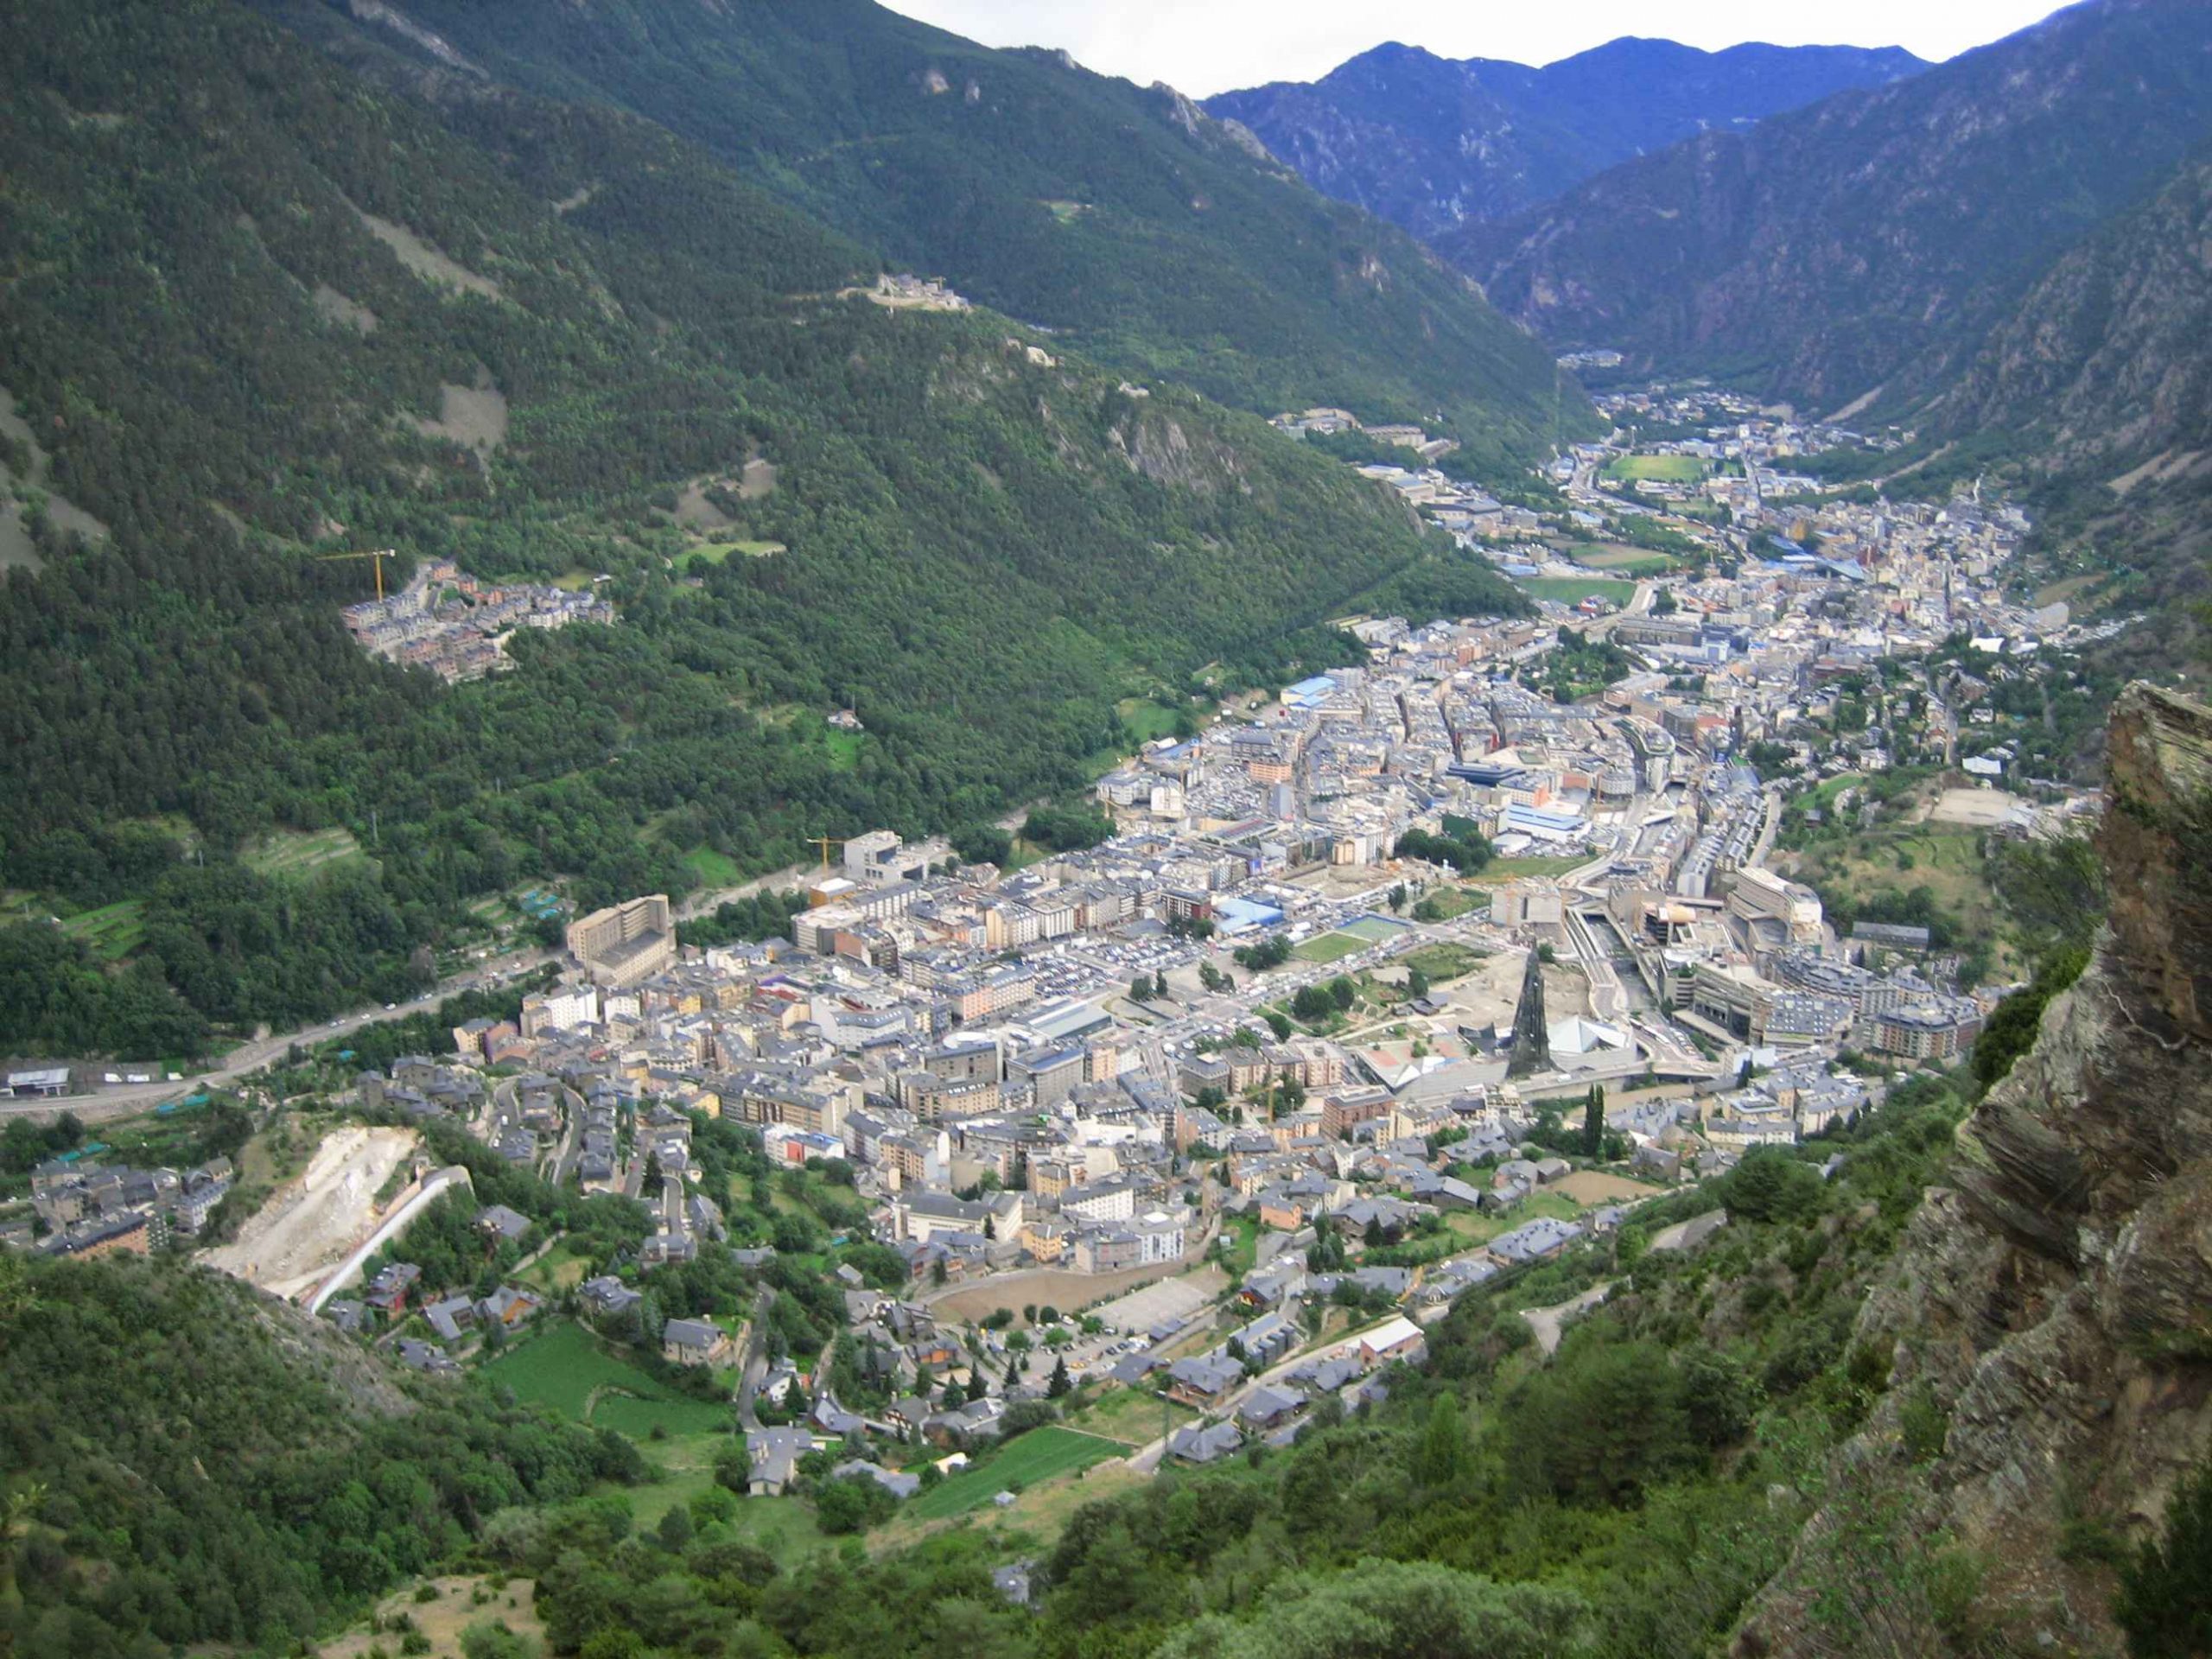 Andorra has just over twice the population of Liechtenstein, and looks a little like it too. 